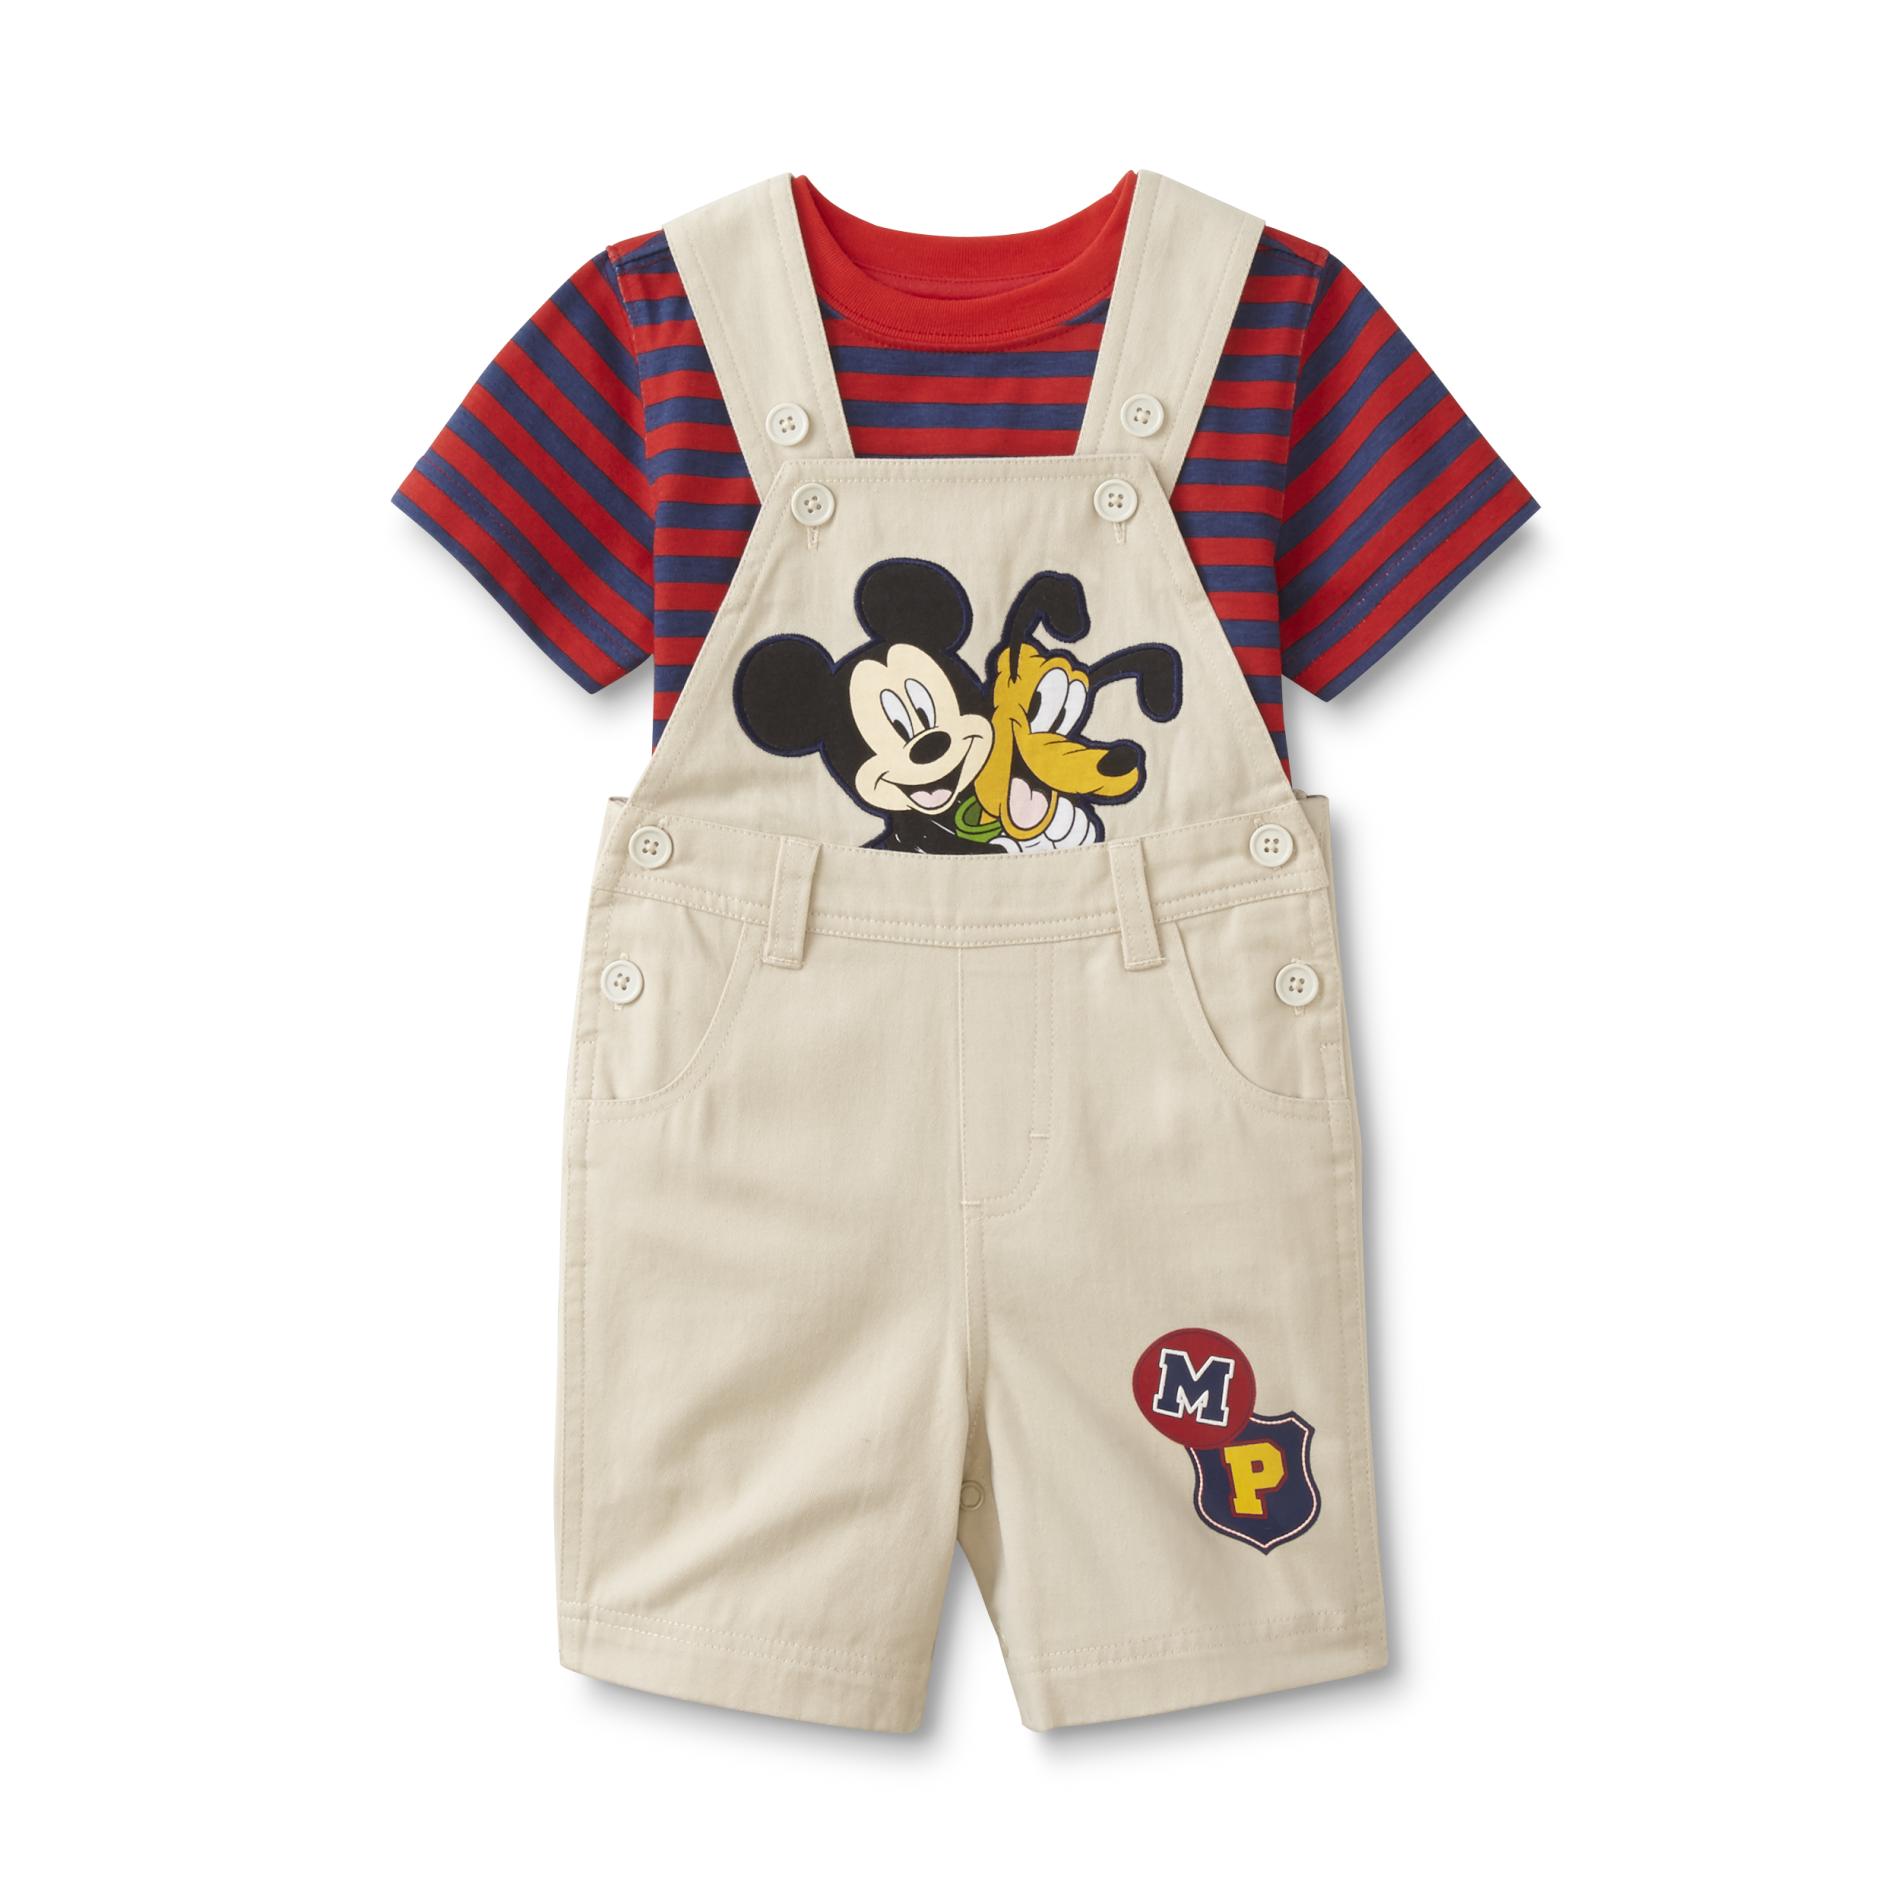 Disney Mickey Mouse Infant Boys' T-Shirt & Overalls - Striped